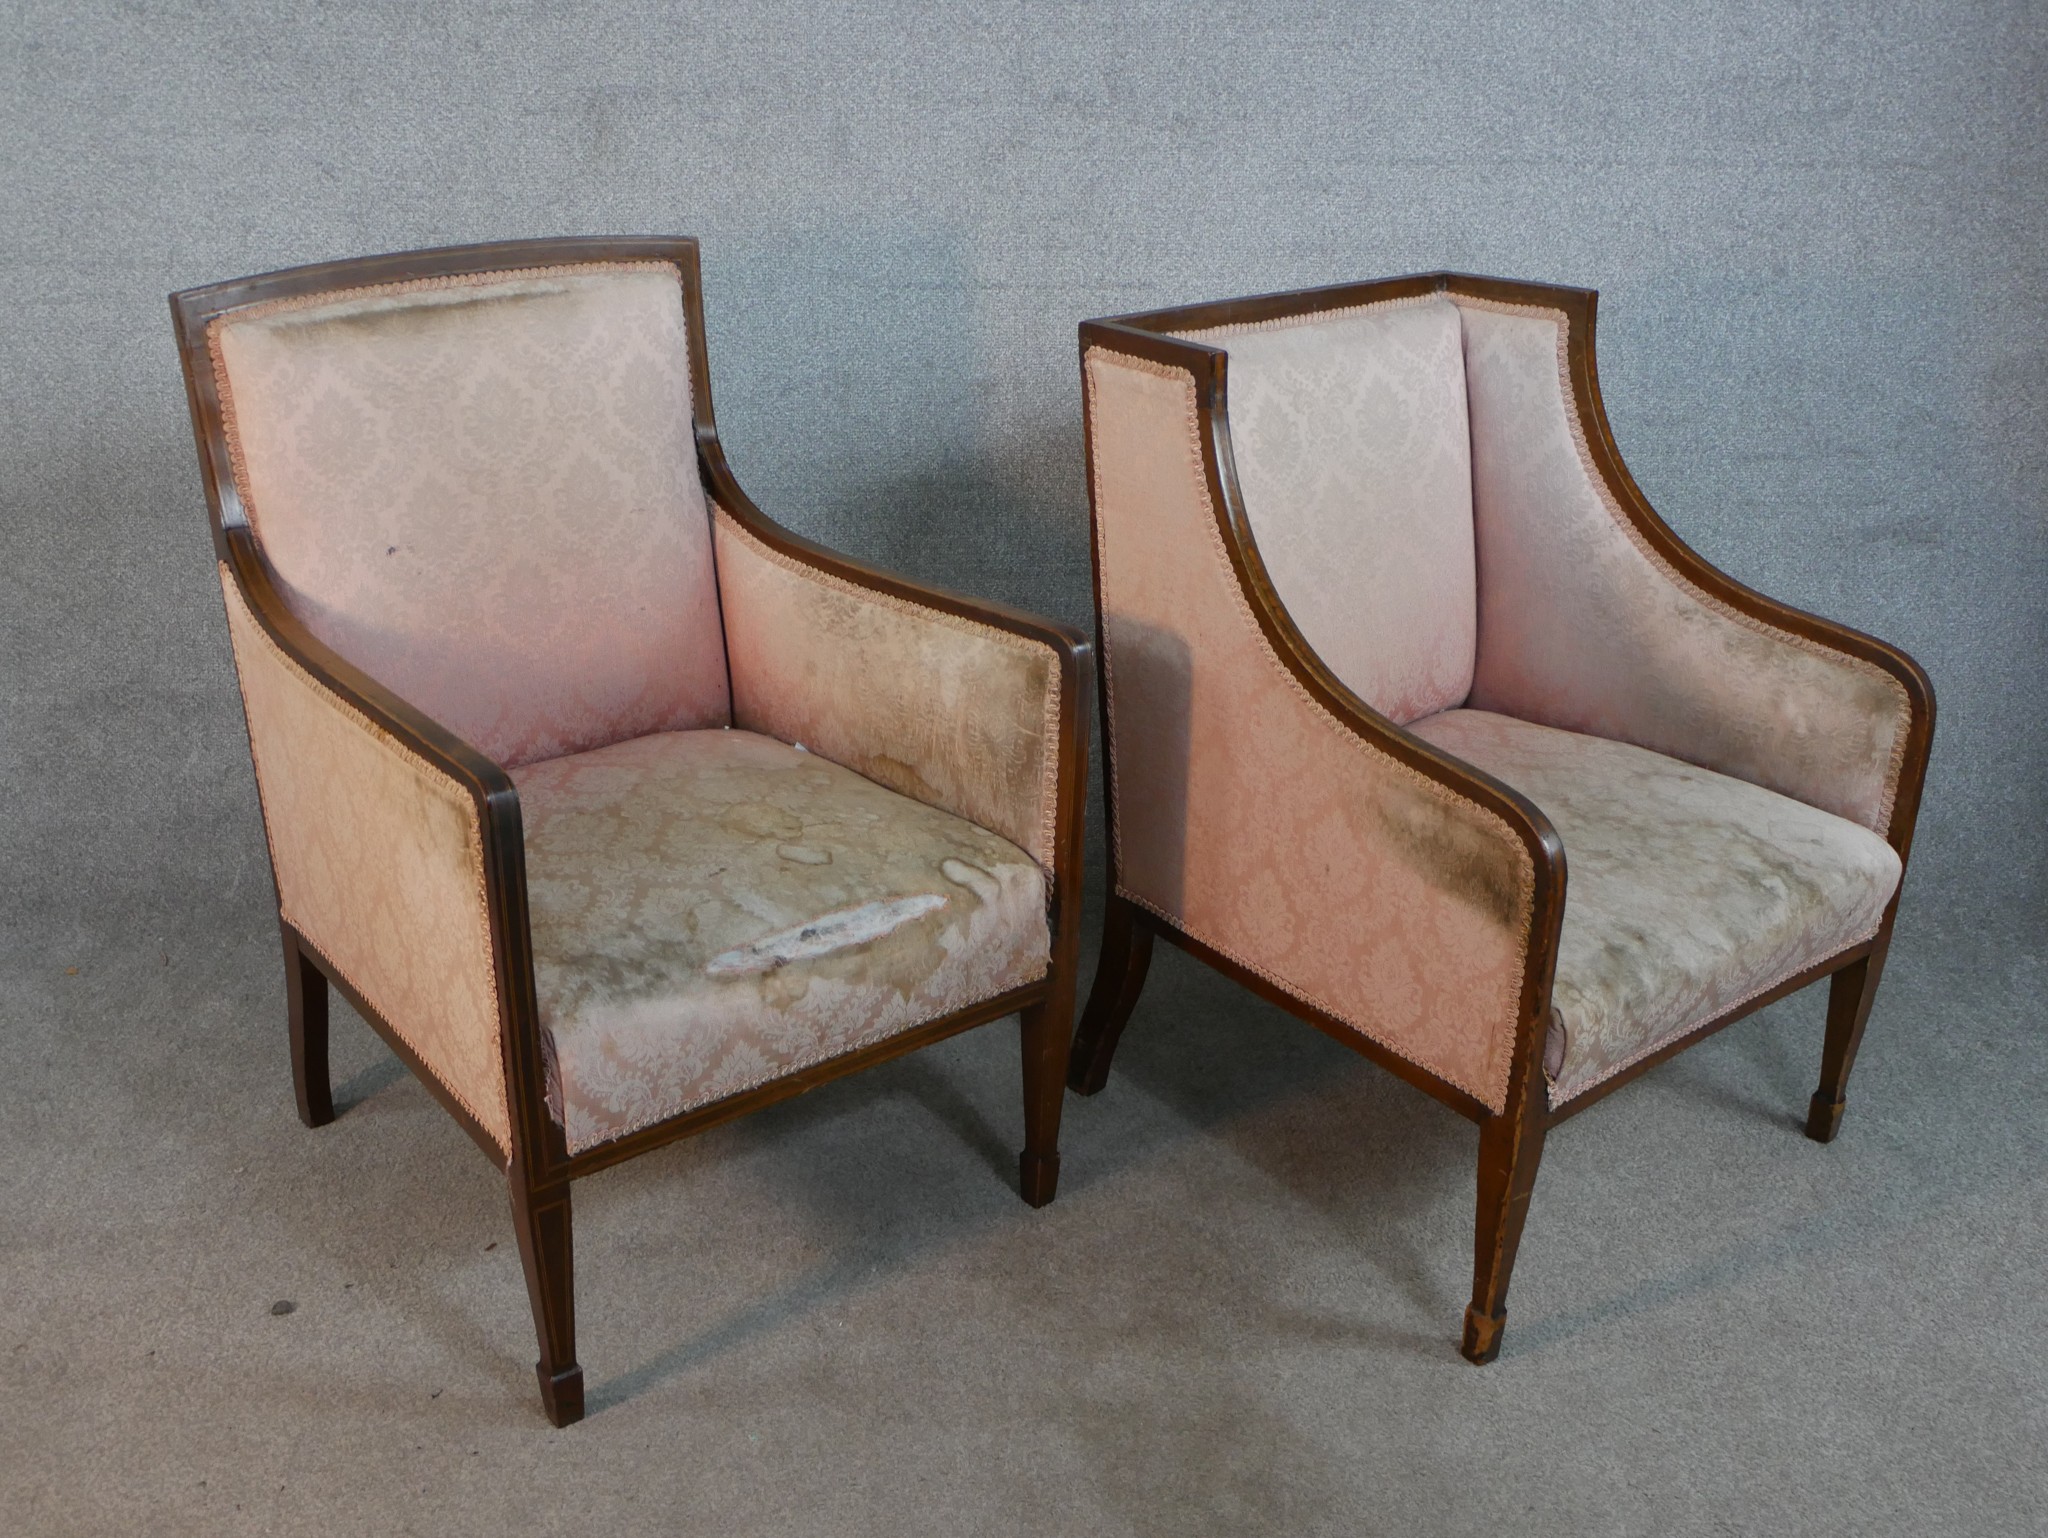 A pair of Edwardian mahogany and line inlaid armchairs, upholstered with pink damask, on tapering - Image 11 of 11